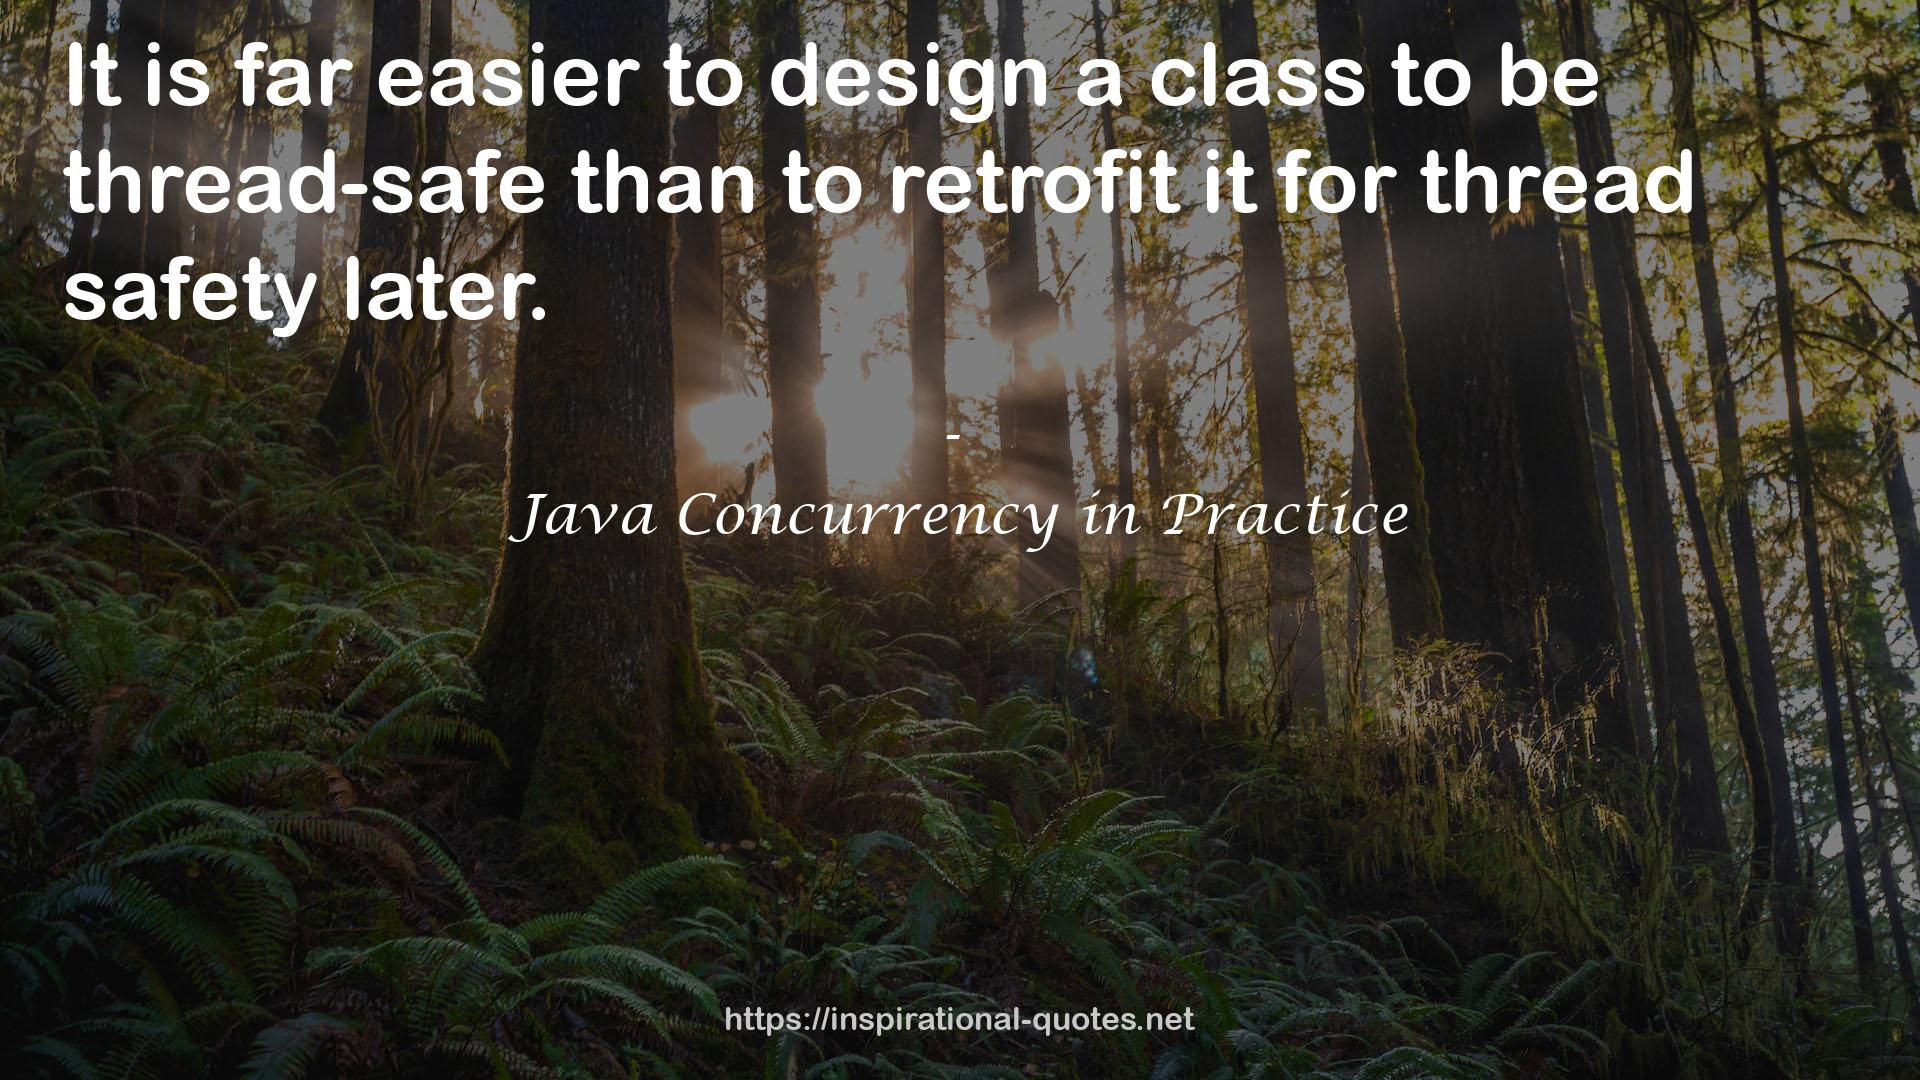 Java Concurrency in Practice QUOTES